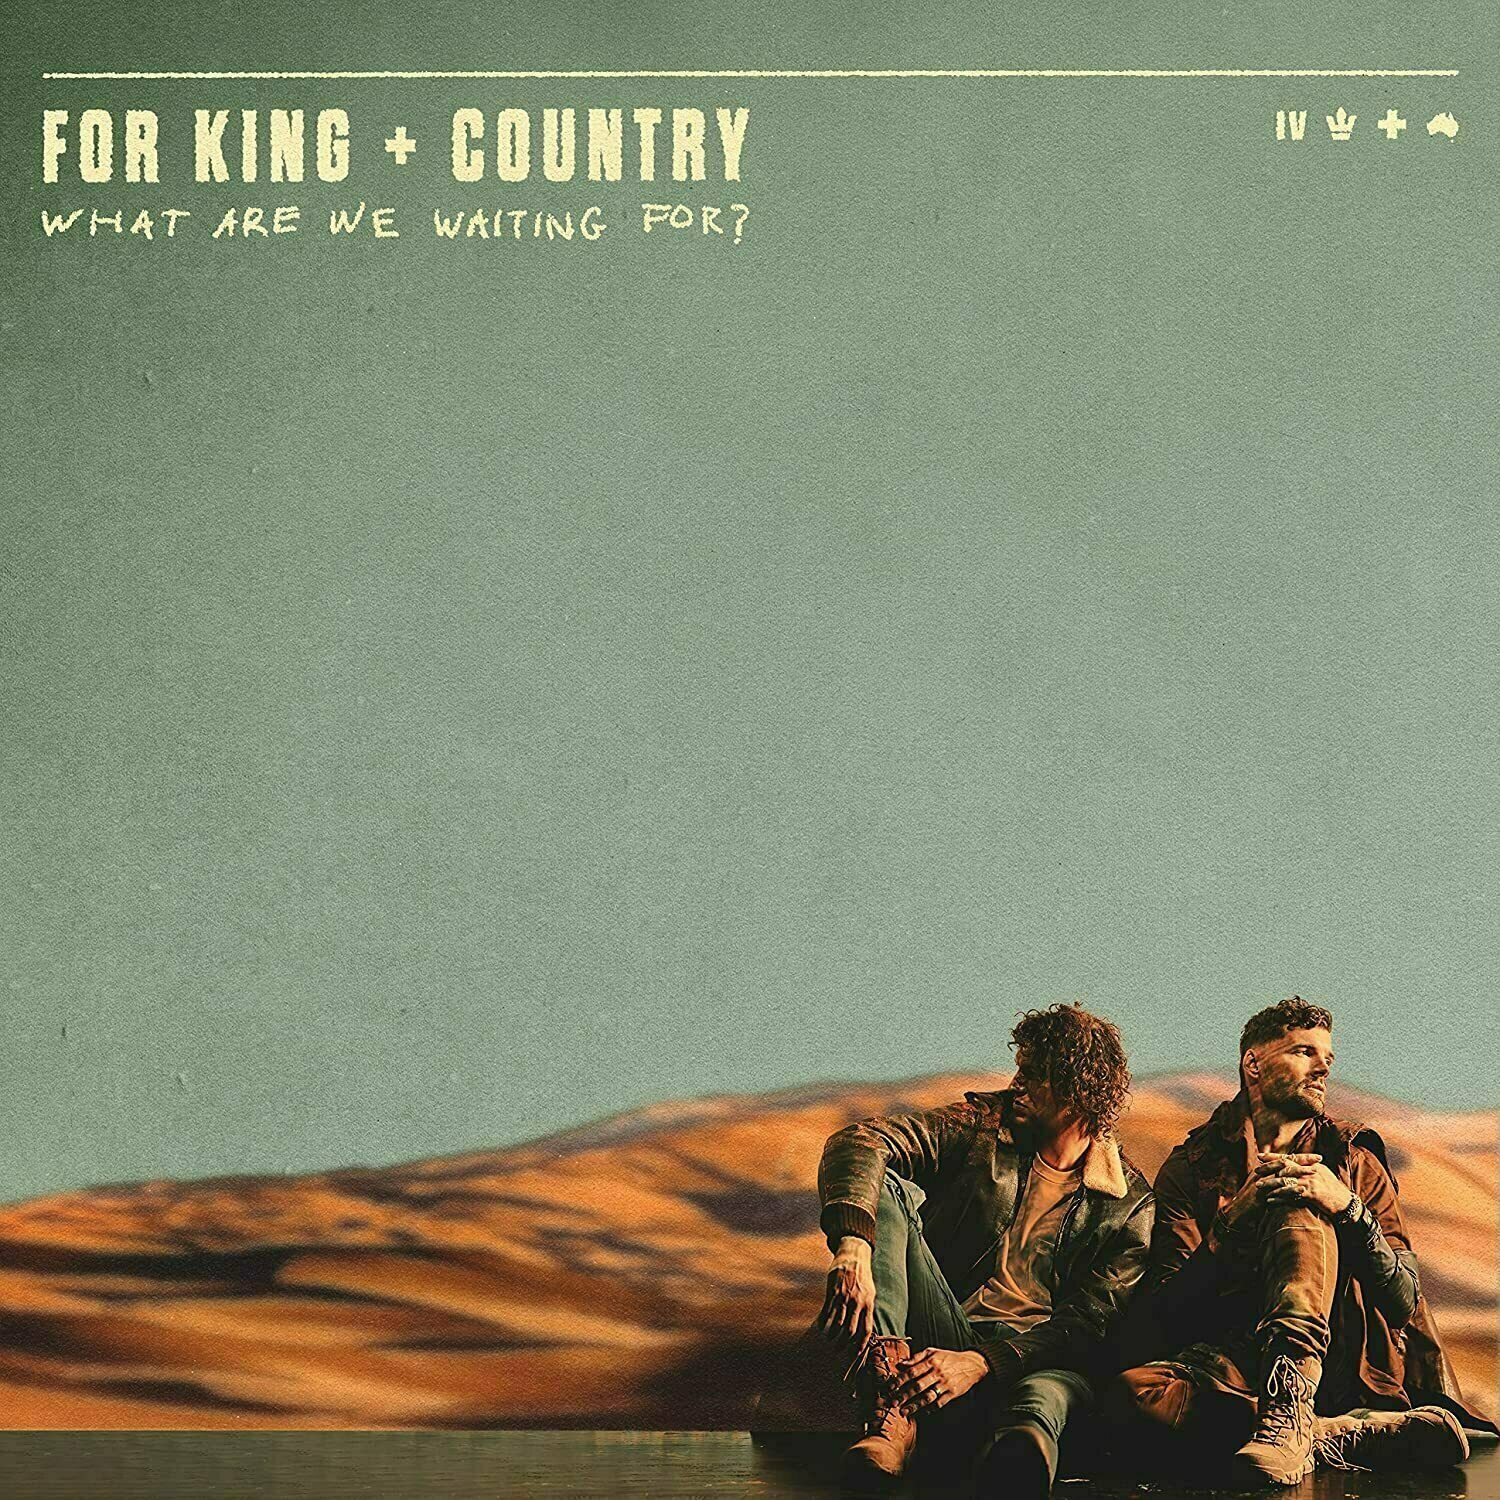 Vinyl Record For King & Country - What Are We Waiting For? (2 LP)